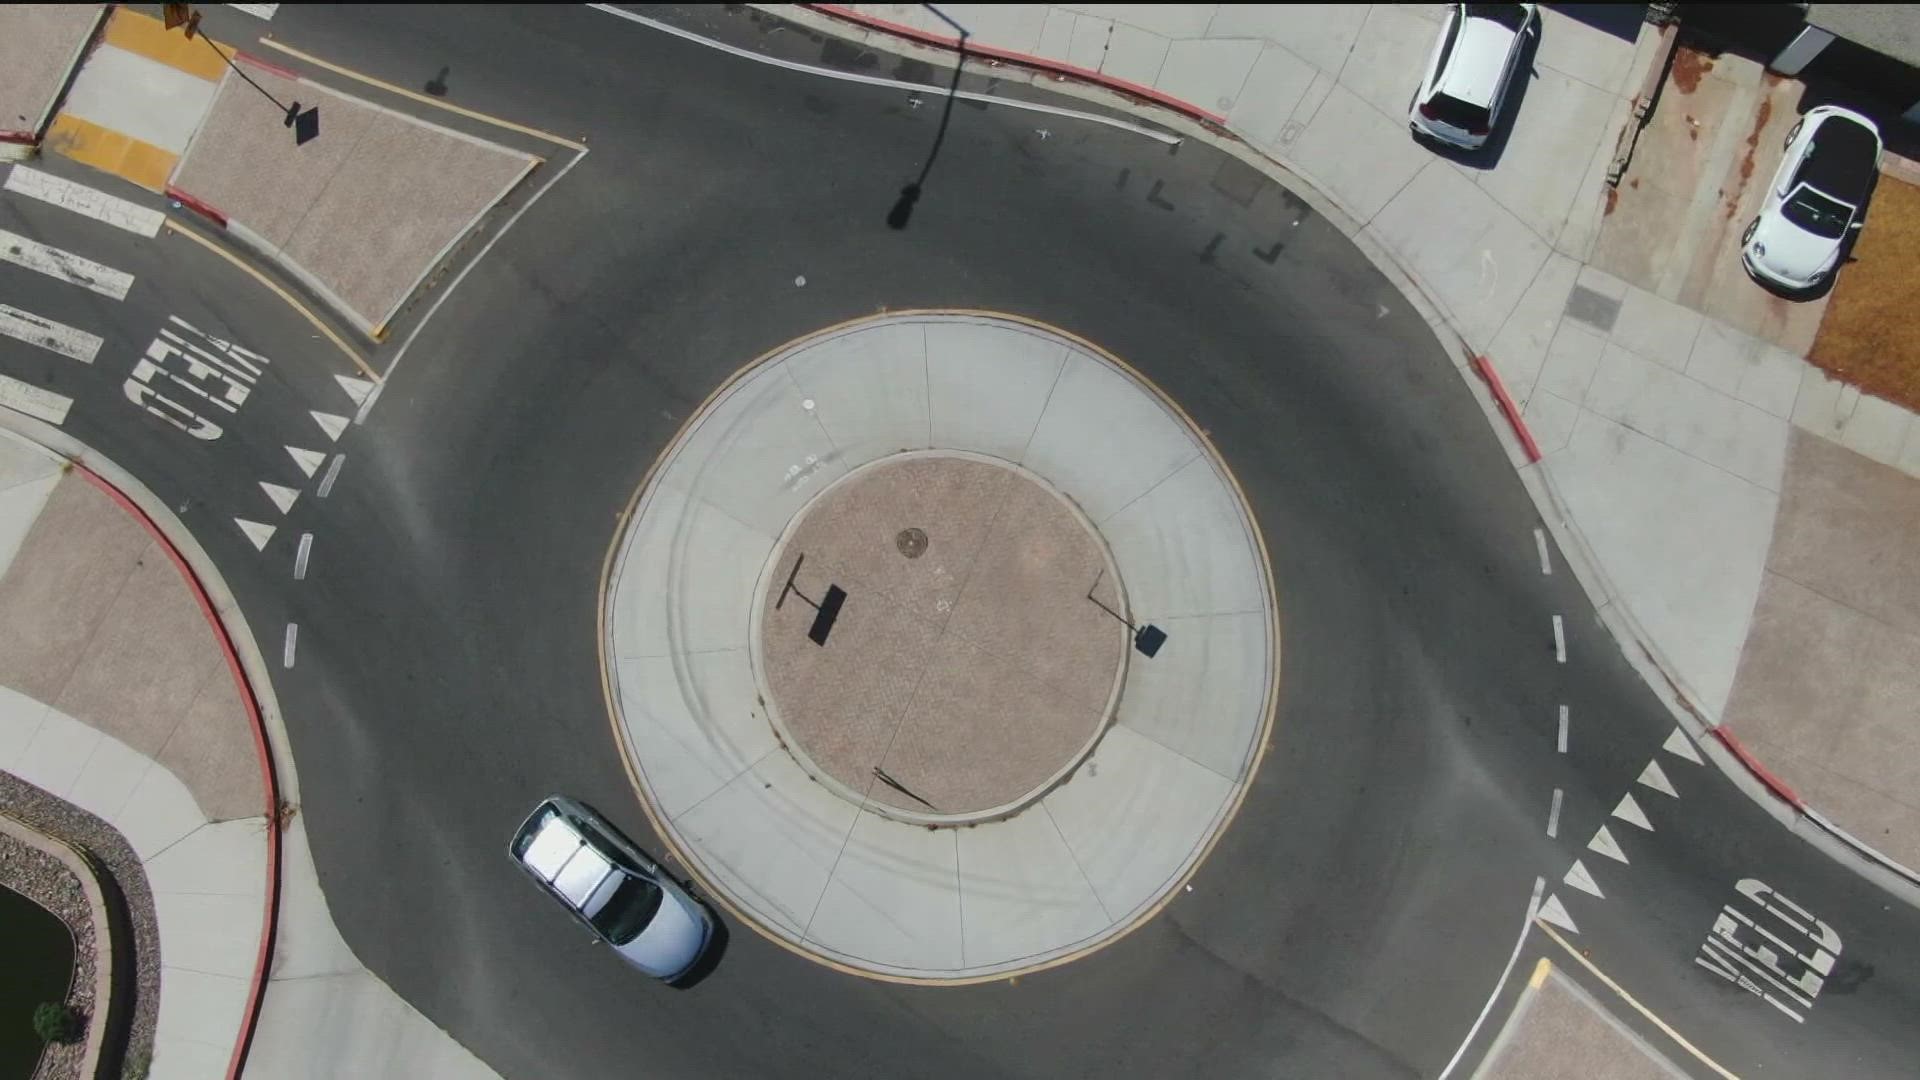 Residents say a traffic circle is poorly designed and dangerous